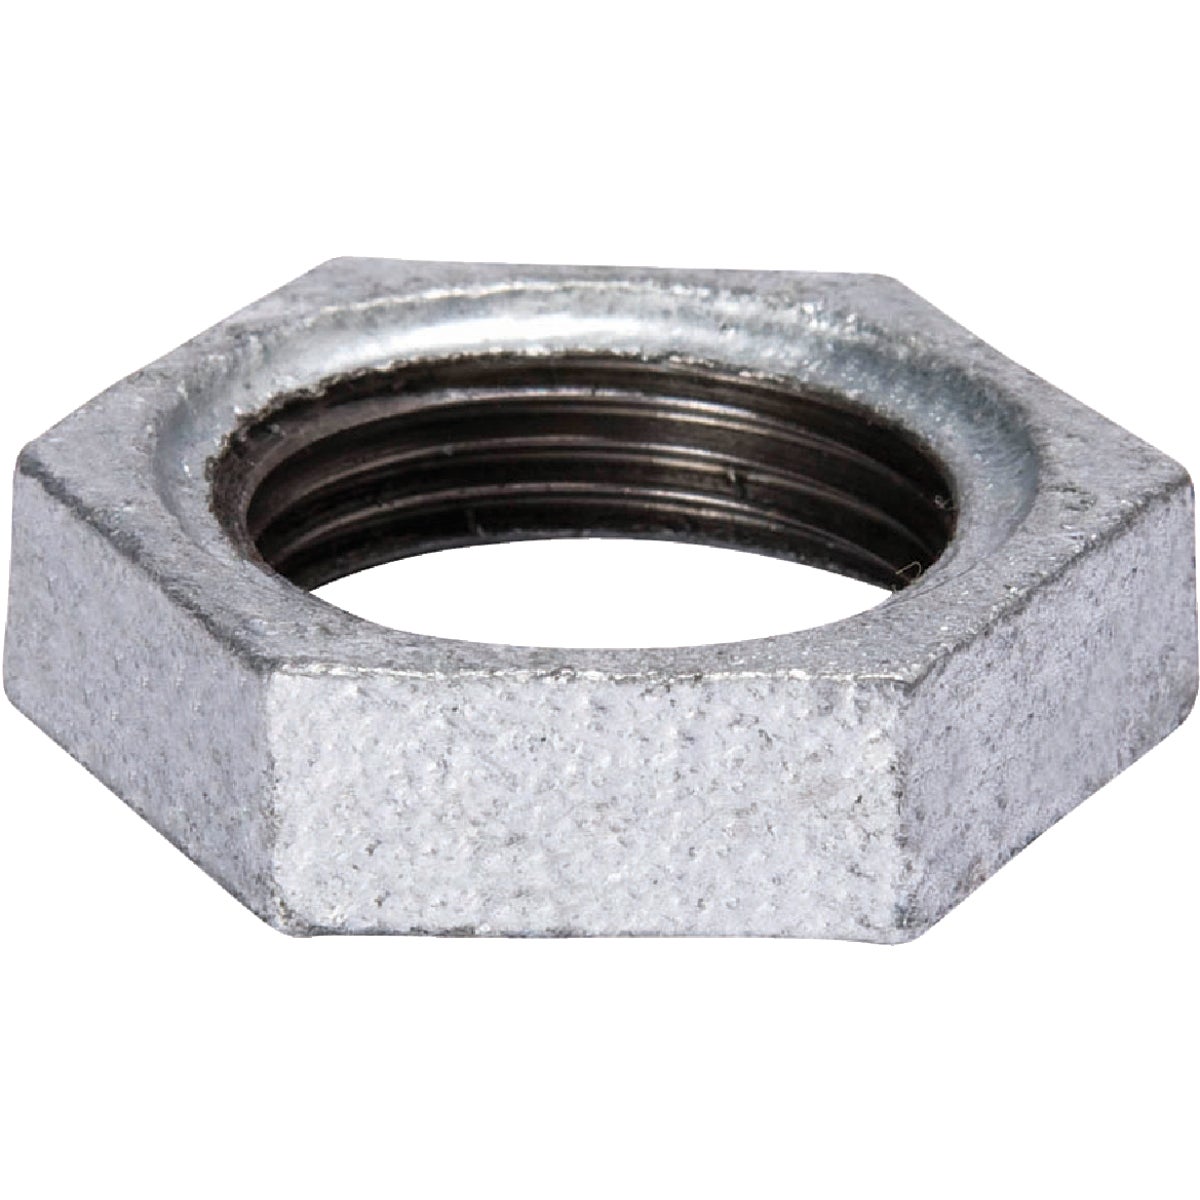 Southland 3/4 In. Malleable Iron Galvanized Lock Nut